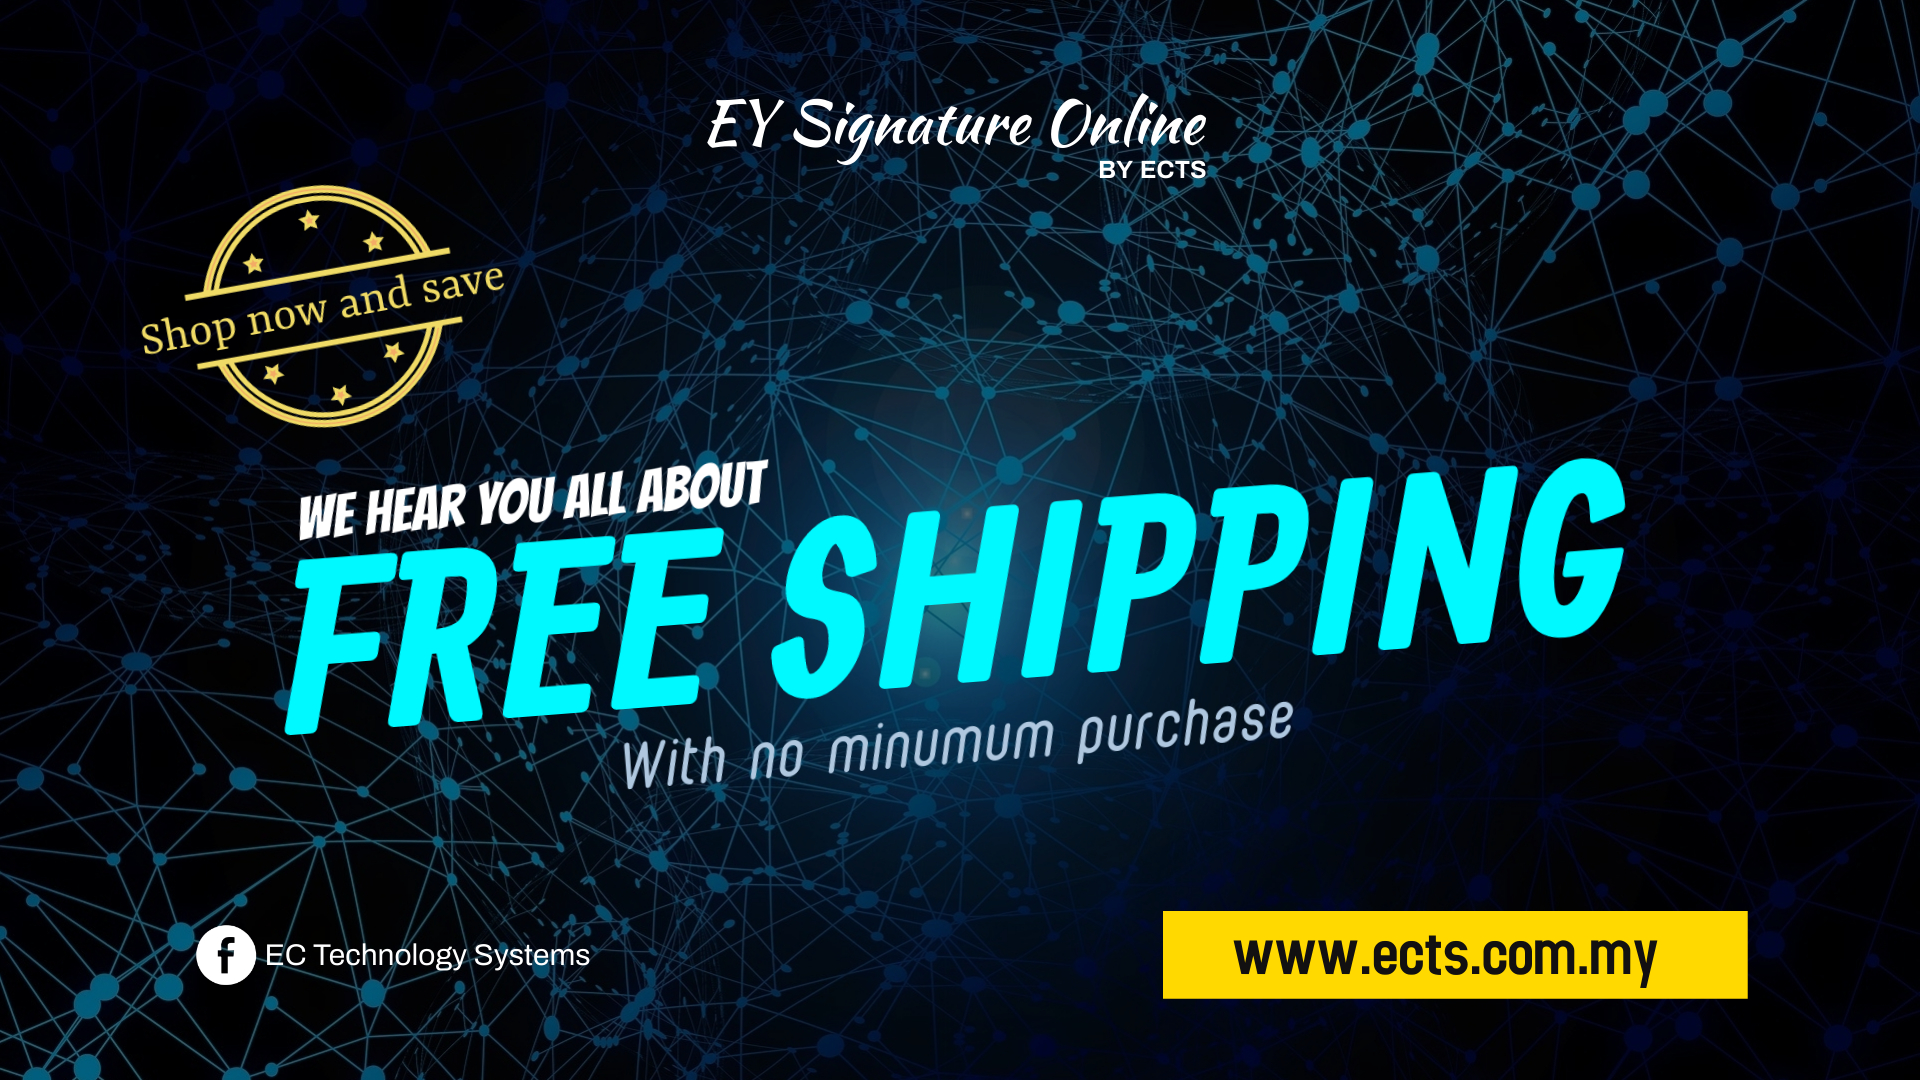 EY Signature Online by ECTS - All FREE SHIPPING